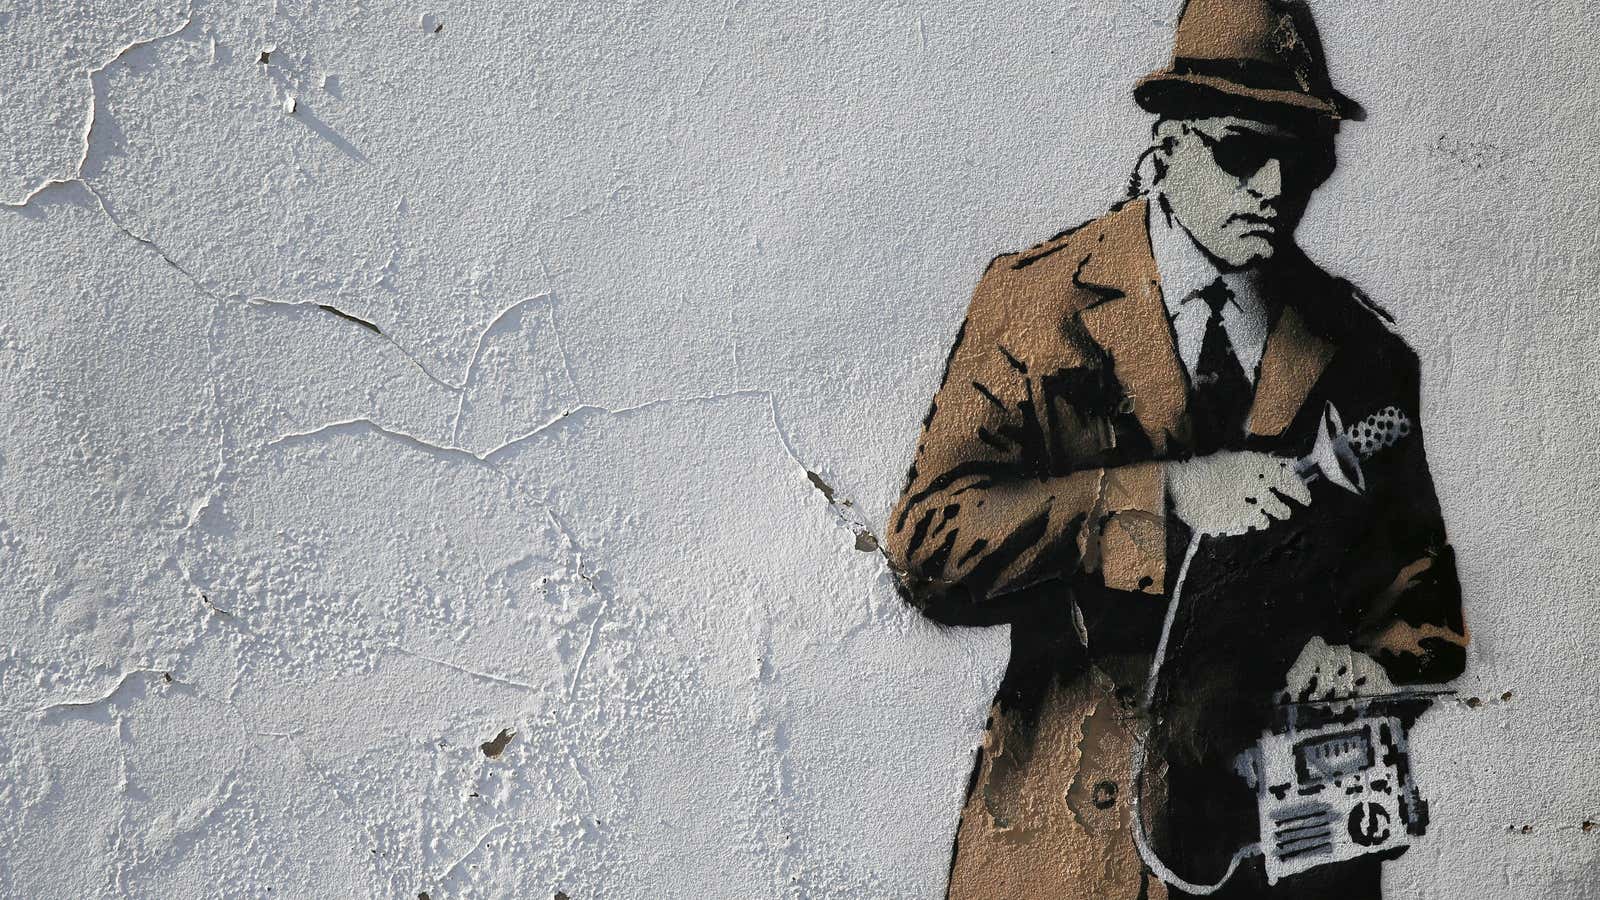 A detail from graffiti art is seen on a wall near the headquarters of Britain’s eavesdropping agency, Government Communications Headquarters, known as GCHQ, in Cheltenham,…